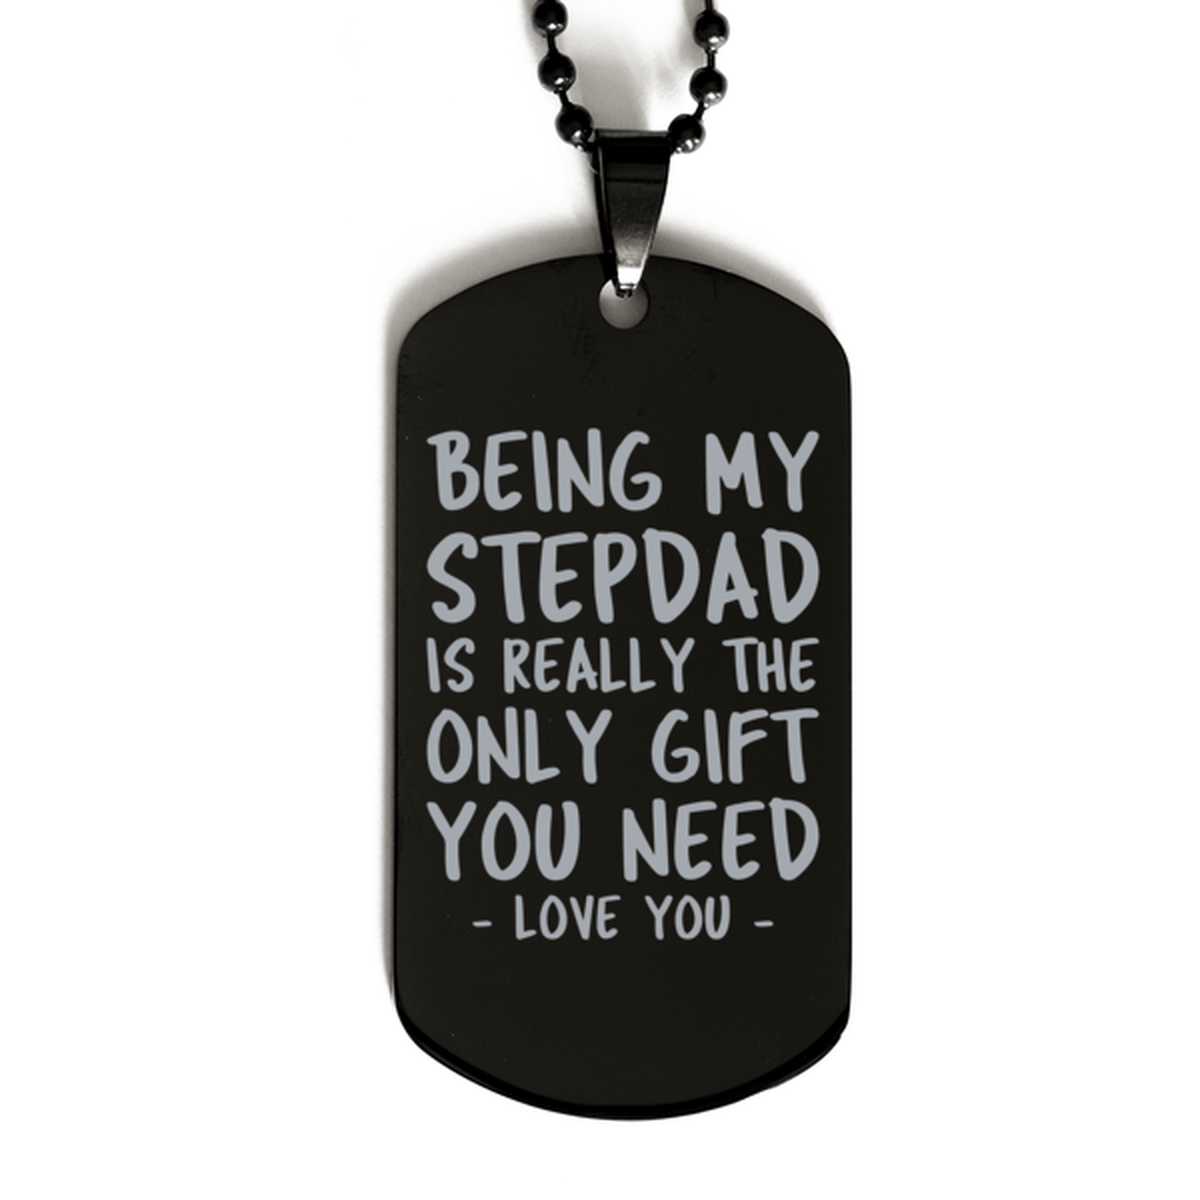 Funny Stepdad Black Dog Tag Necklace, Being My Stepdad Is Really the Only Gift You Need, Best Birthday Gifts for Stepdad